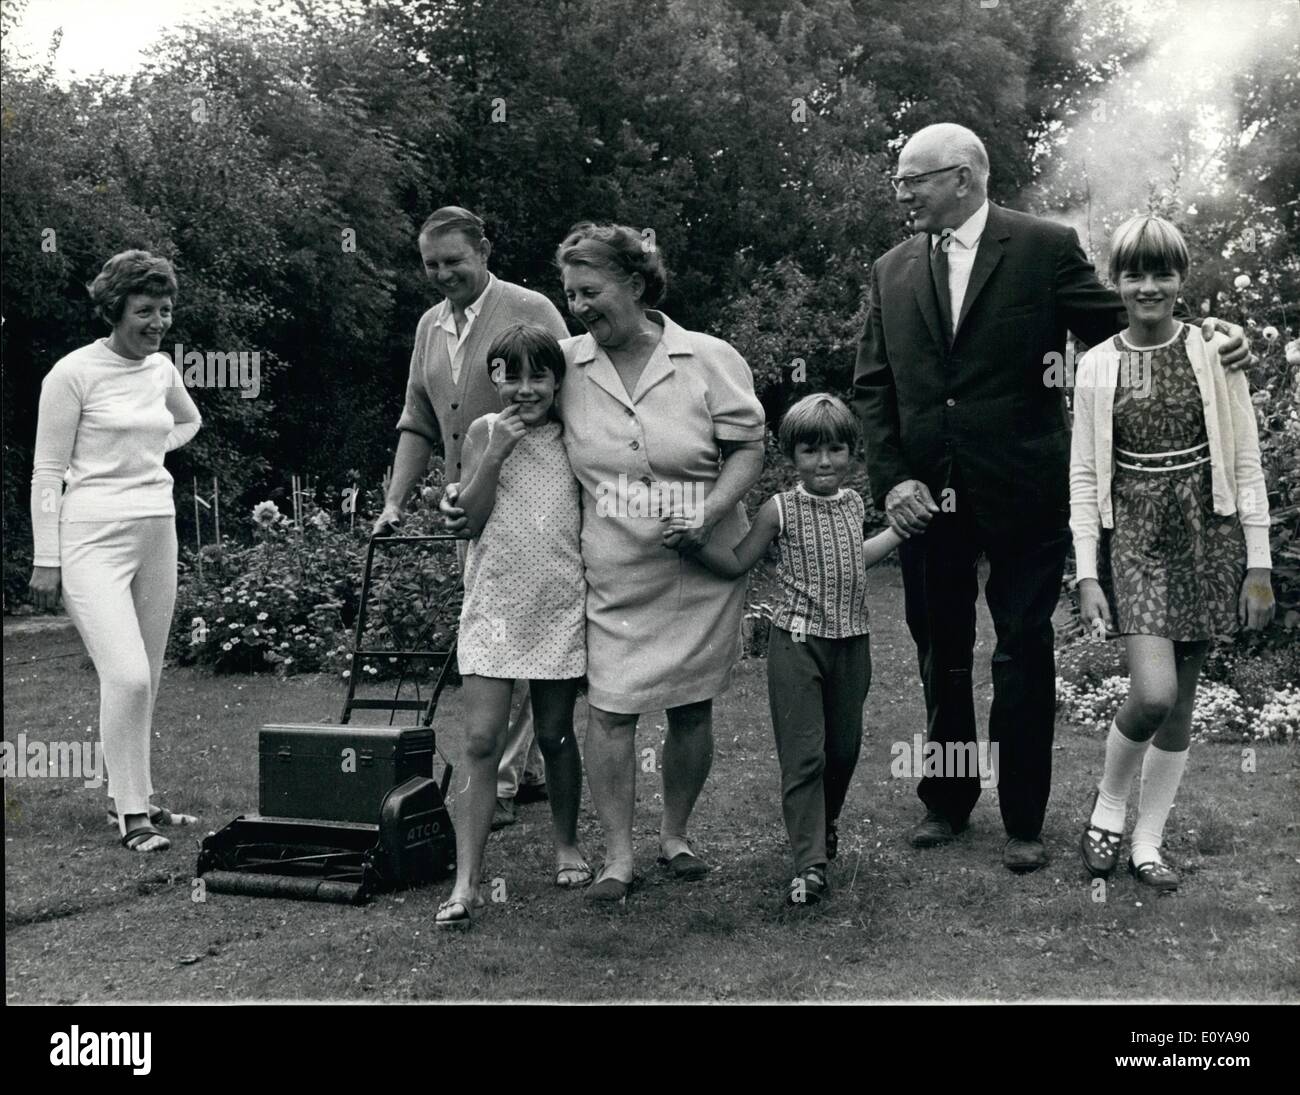 Sep. 09, 1969 - COUSINS' SON WILL CARRY ON UNION CRUSADE, On the eve of his retirement after eleven years as general secretary of the Transport and General Workers' Union, MR. FRANK COUSINS, 65, today, spent a quiet day with his wife, NANCE, in the garden of their home in Carshalton Beeches, Surrey. There was, however, a ''representative&deg; from the union to see of the JUDITH, 5, and JILL, 10.It prosiest, to be an aotive retirement, Mt. Cousins will continue as Chairman of the newly-formed ColMrani-ty-Riastions Commiseion. Stock Photo